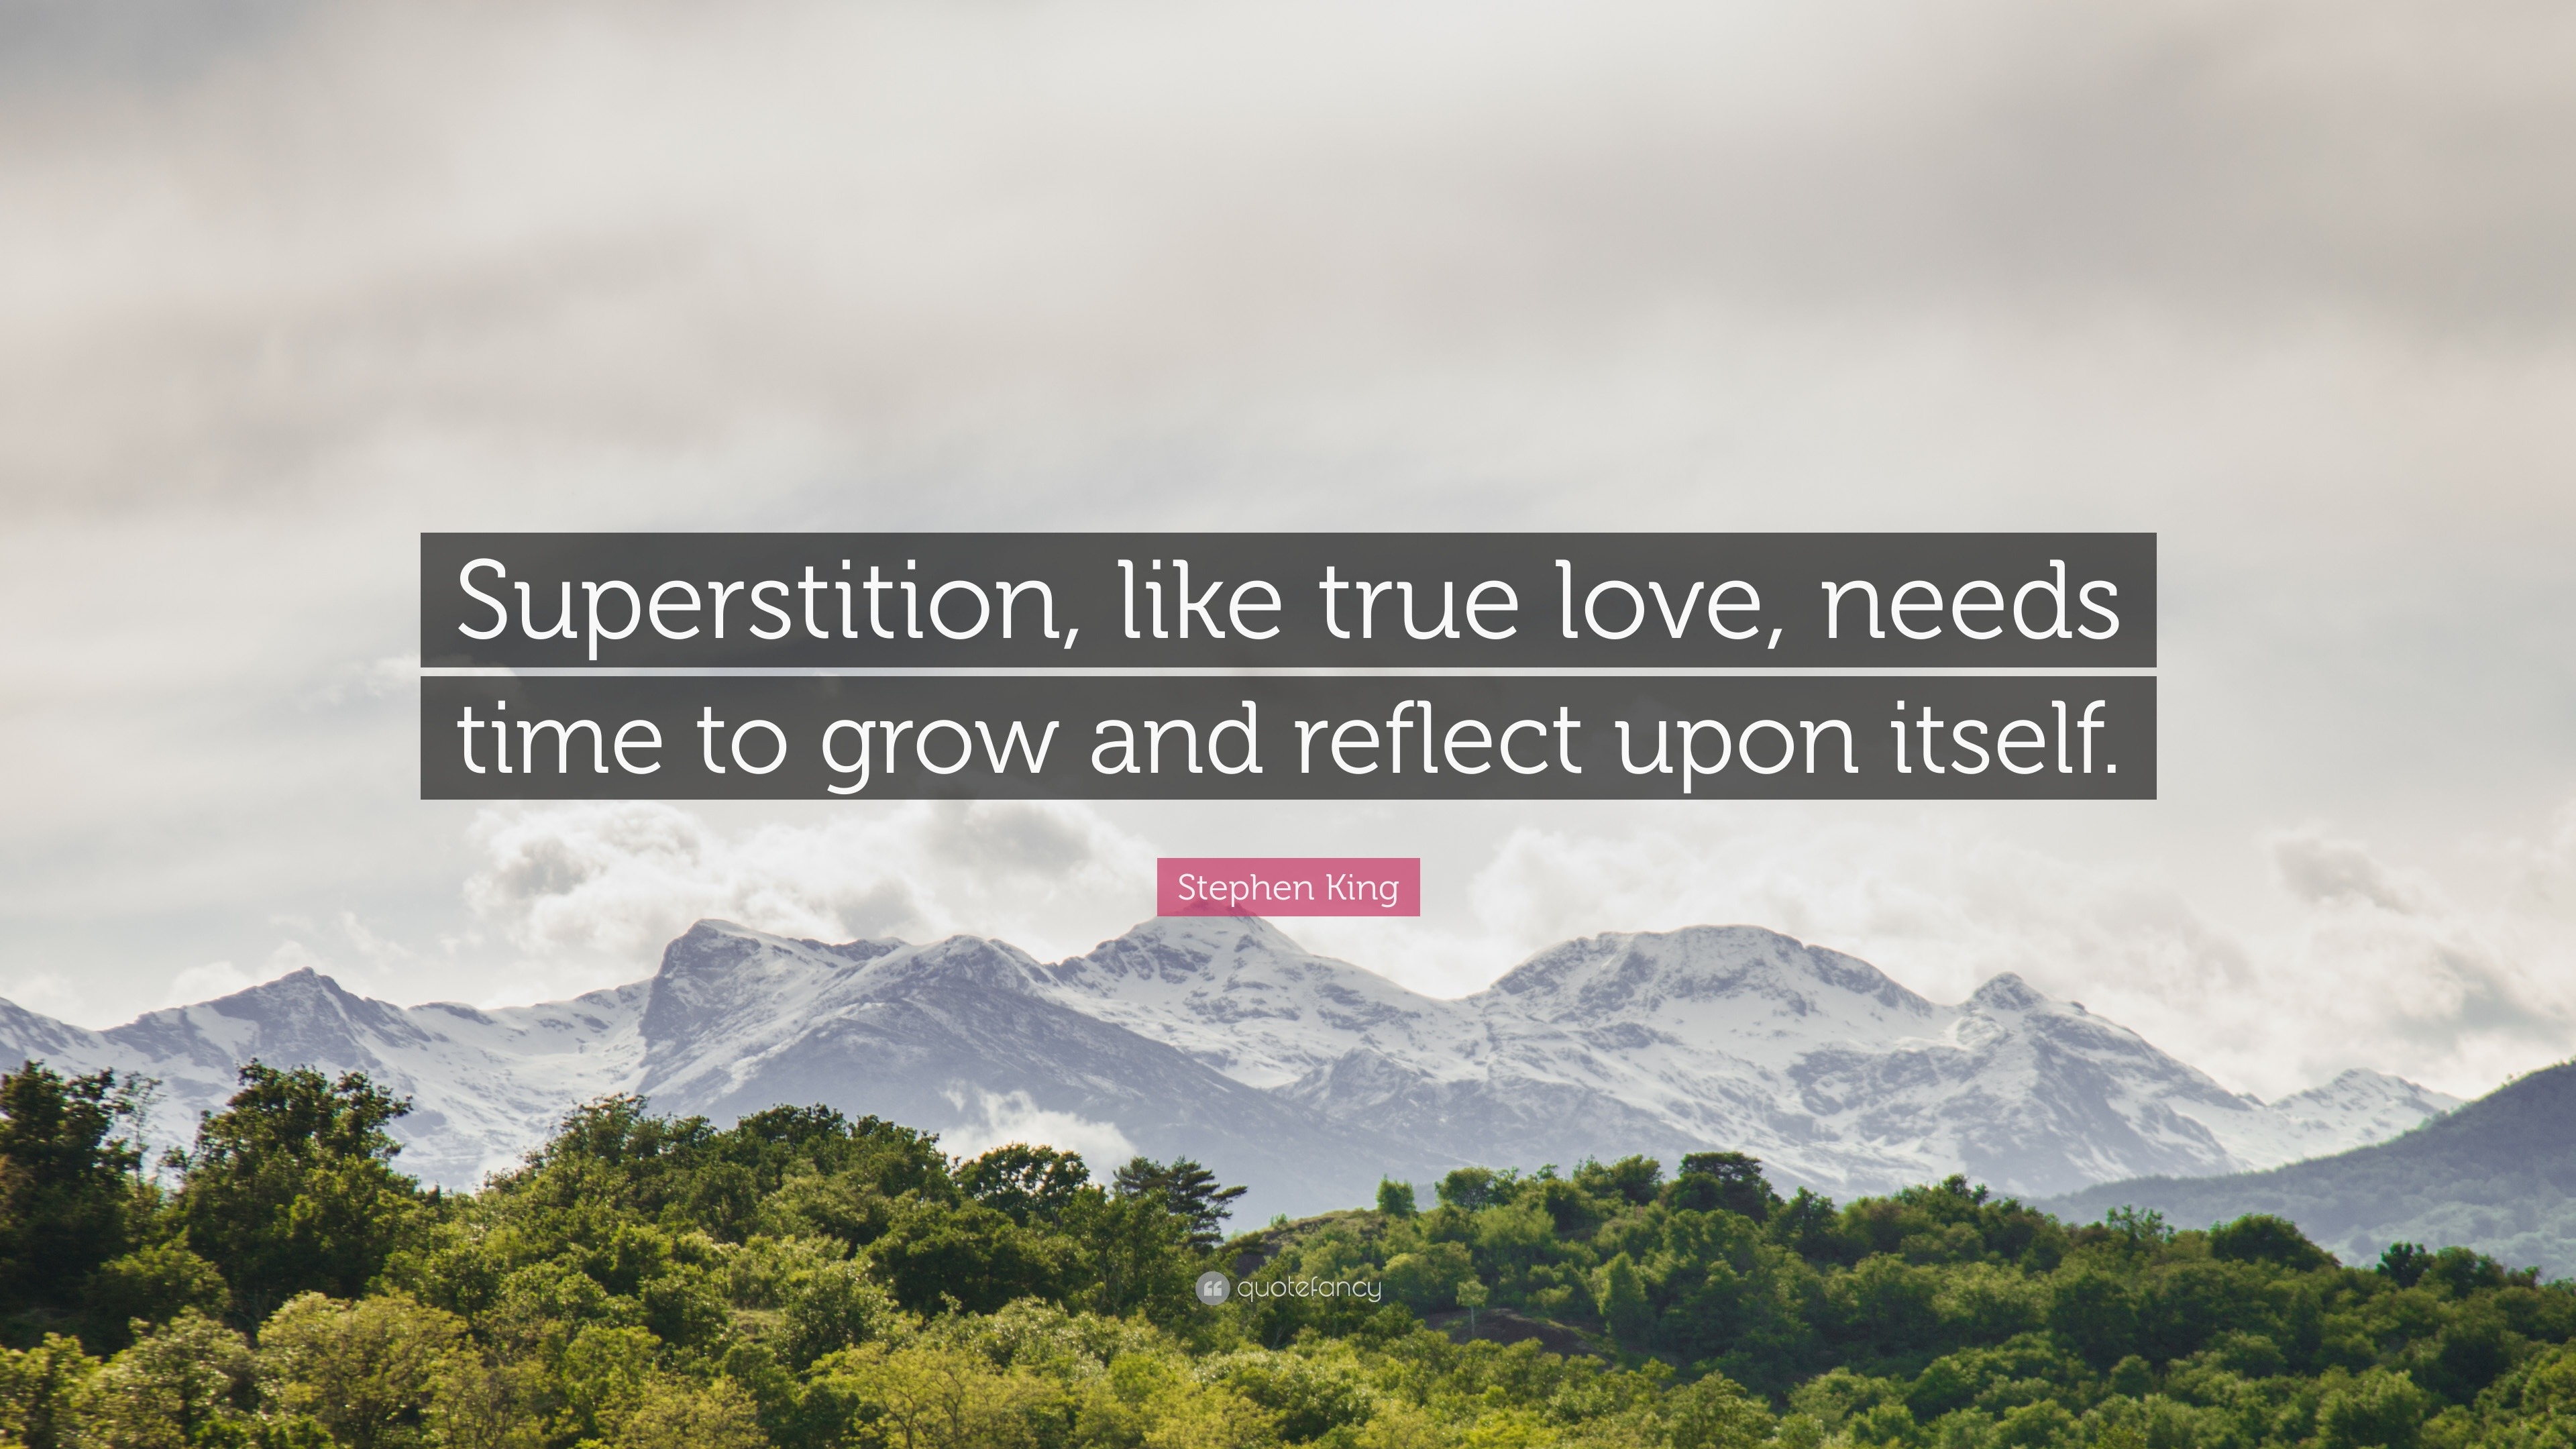 Stephen King Quote “Superstition like true love needs time to grow and